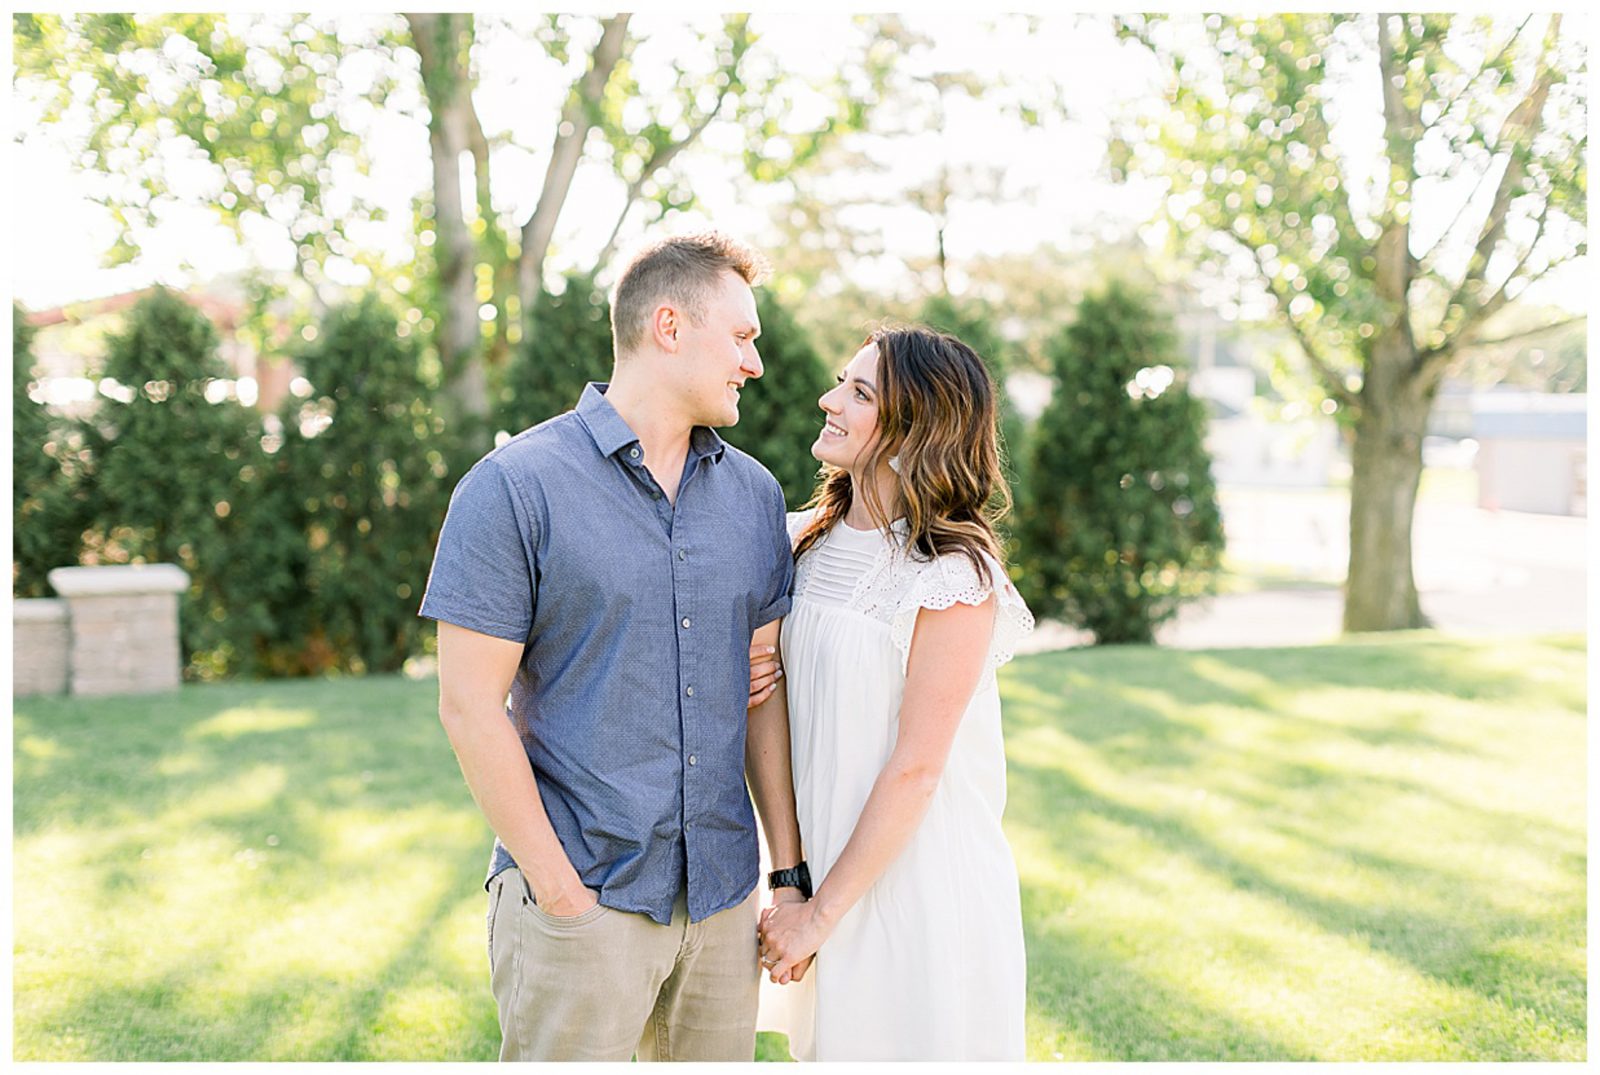 Whimsical Outdoor Minnesota Engagement Session